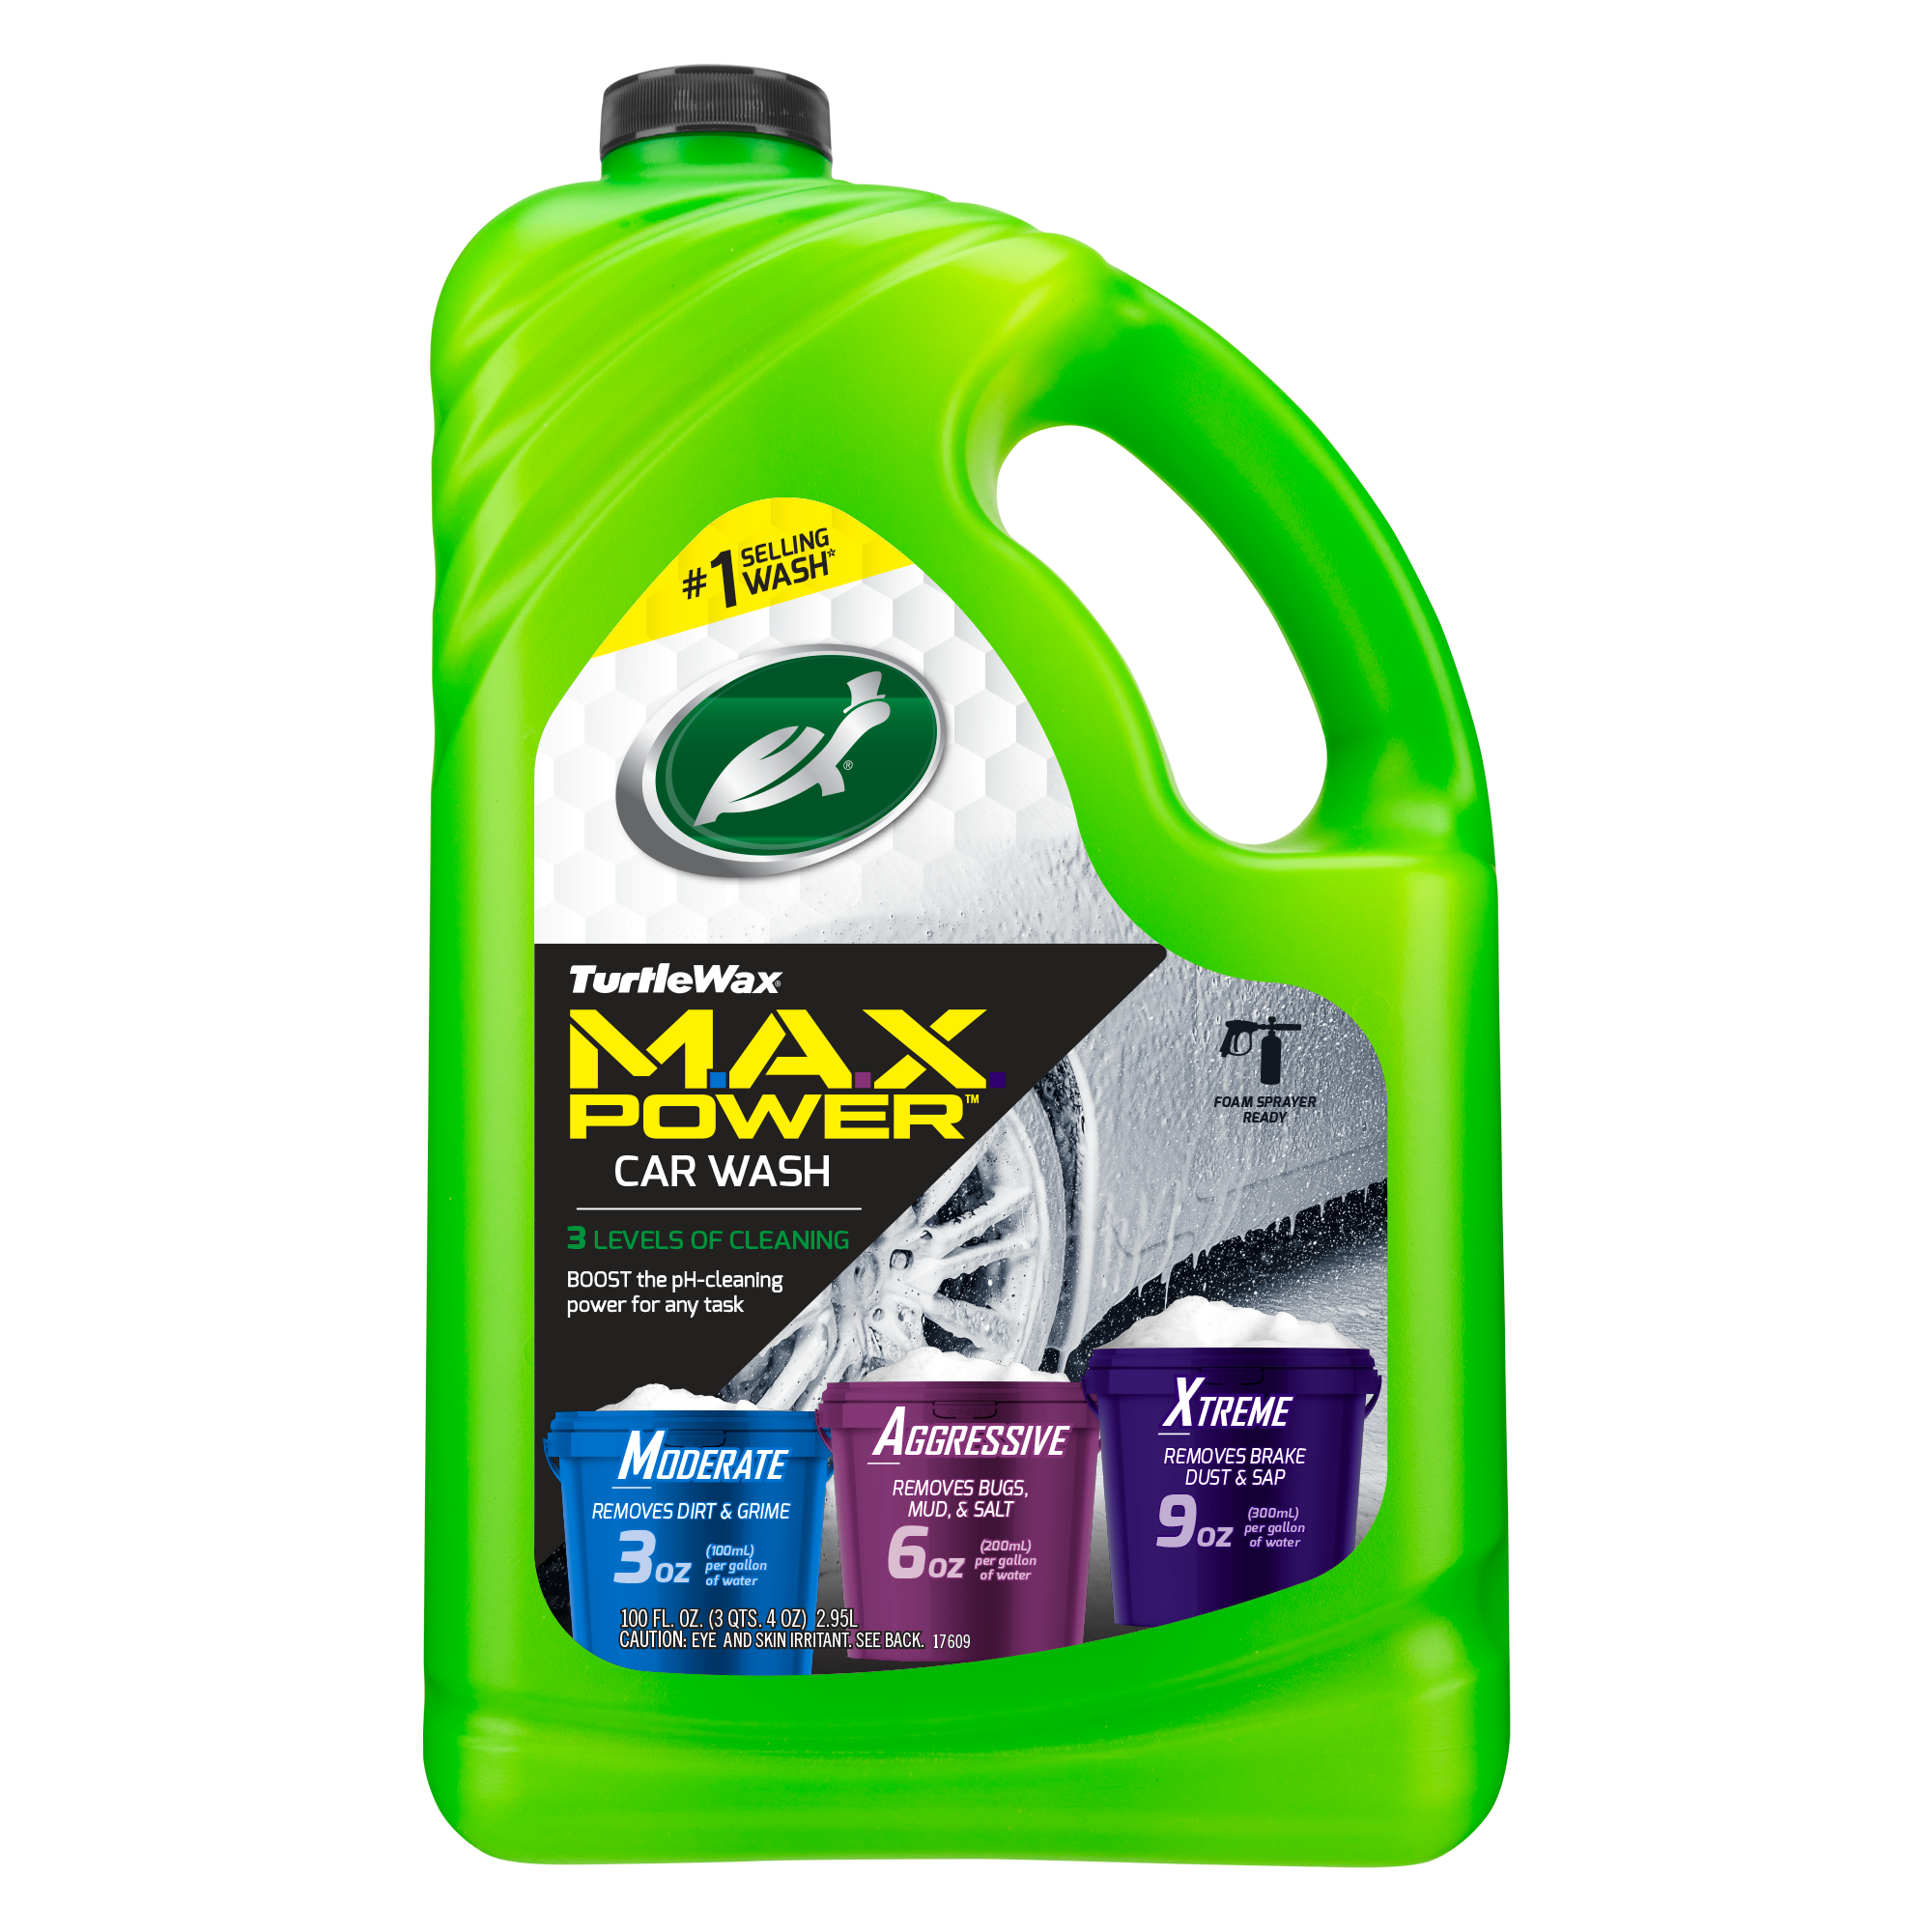 Turtle Wax Hybrid Solutions Ceramic Wet Wax - Buy Car Care Products Online